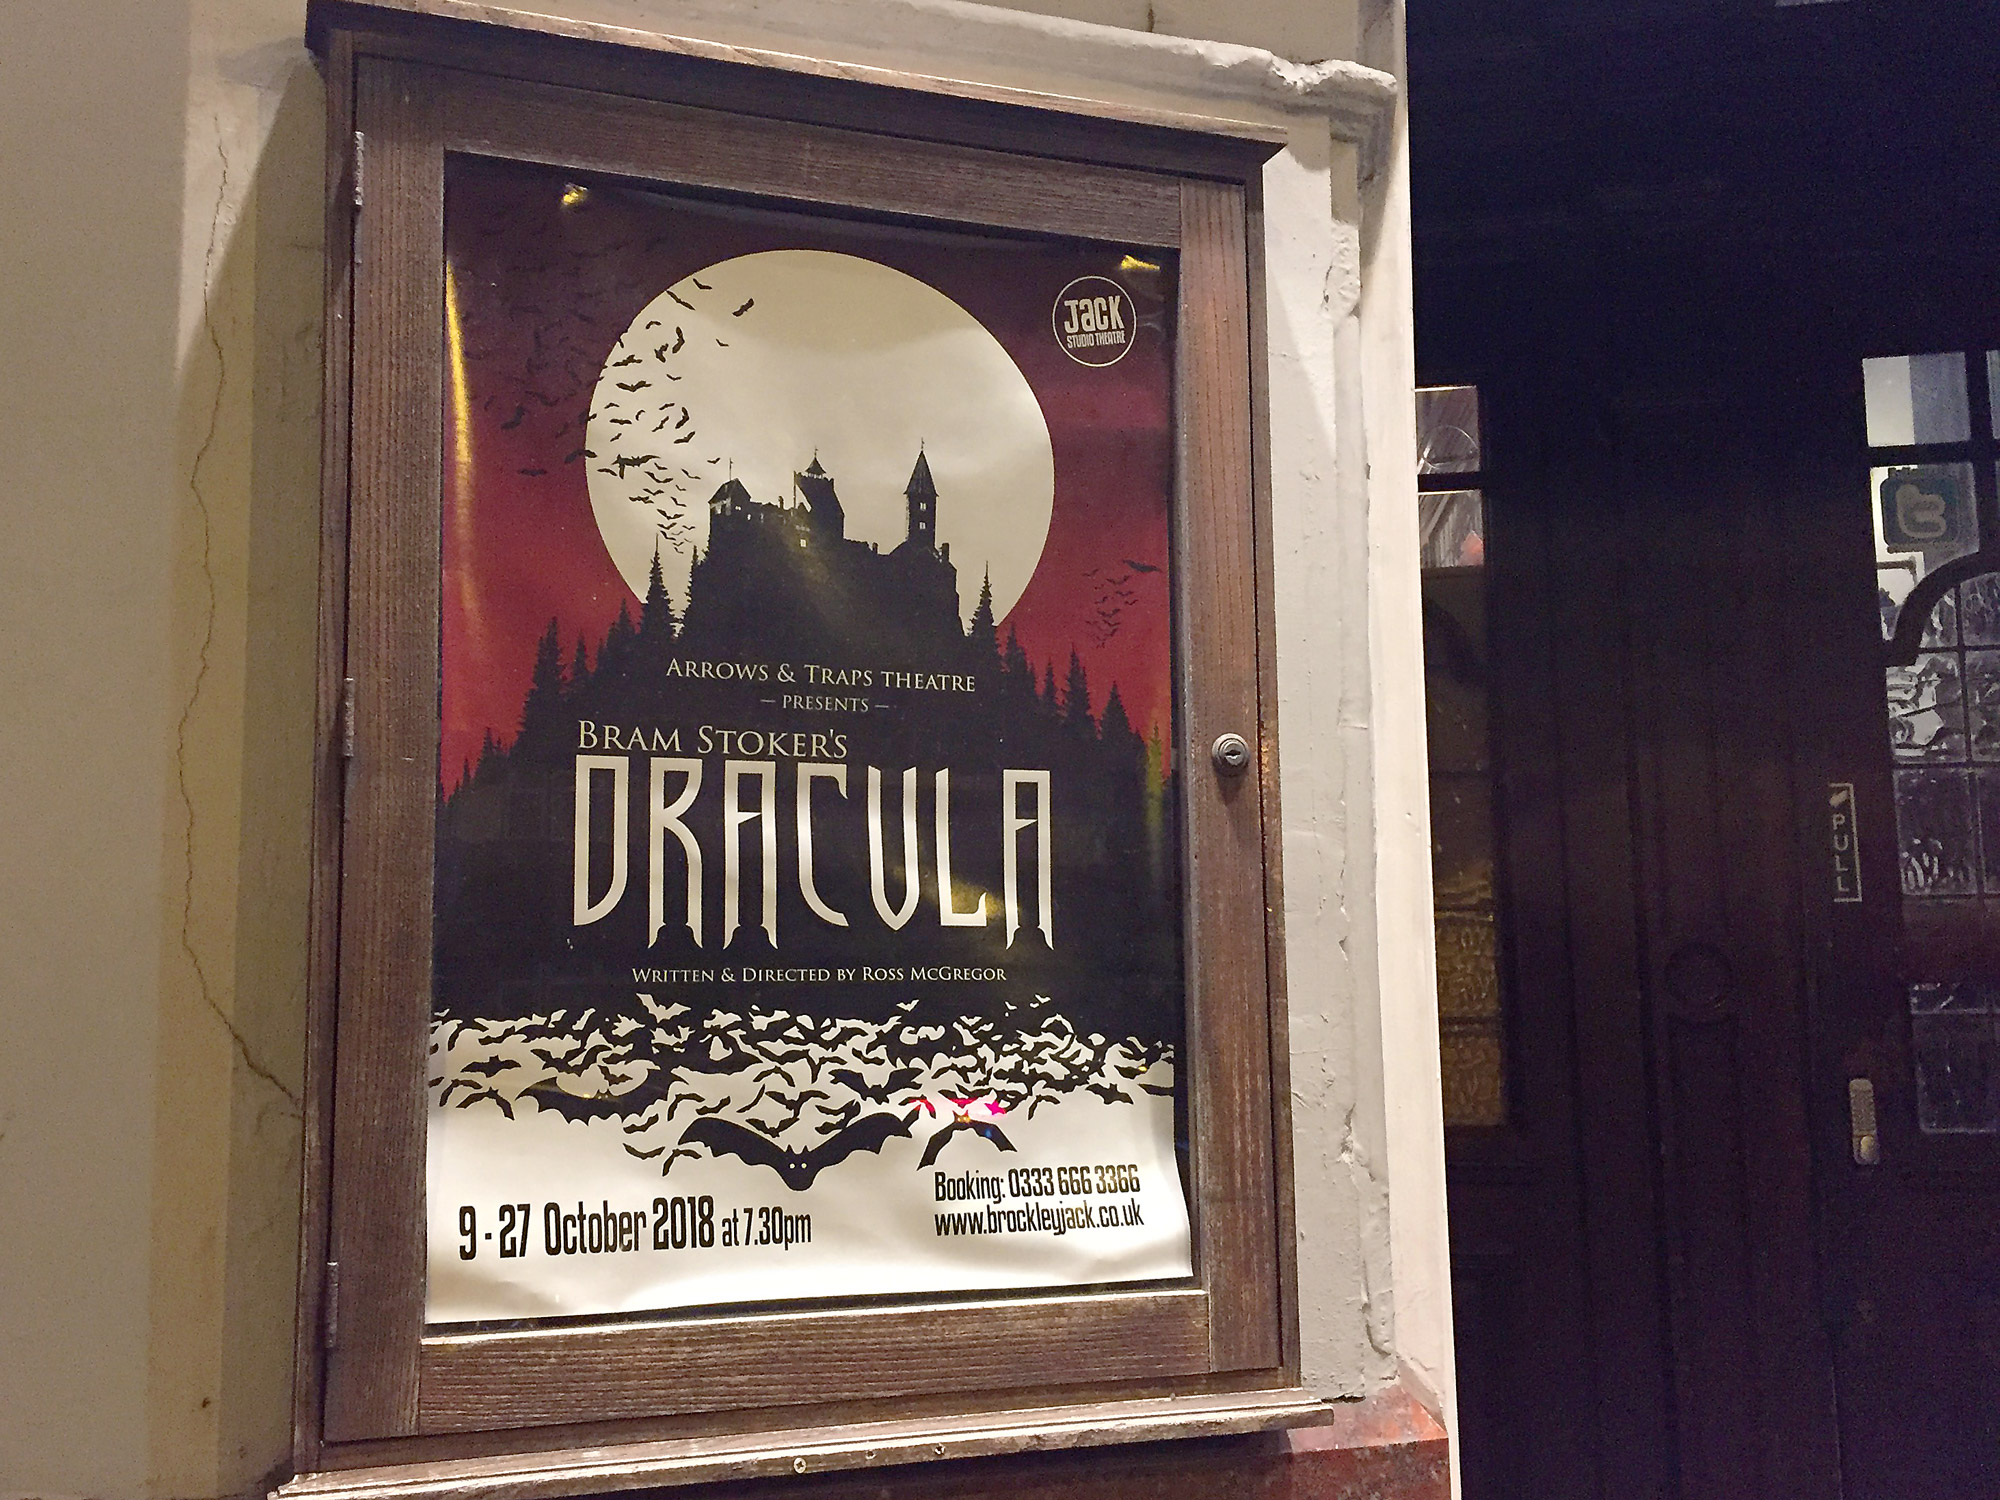 Poster for the production of Dracula, in a wooden frame fixed to a wall.